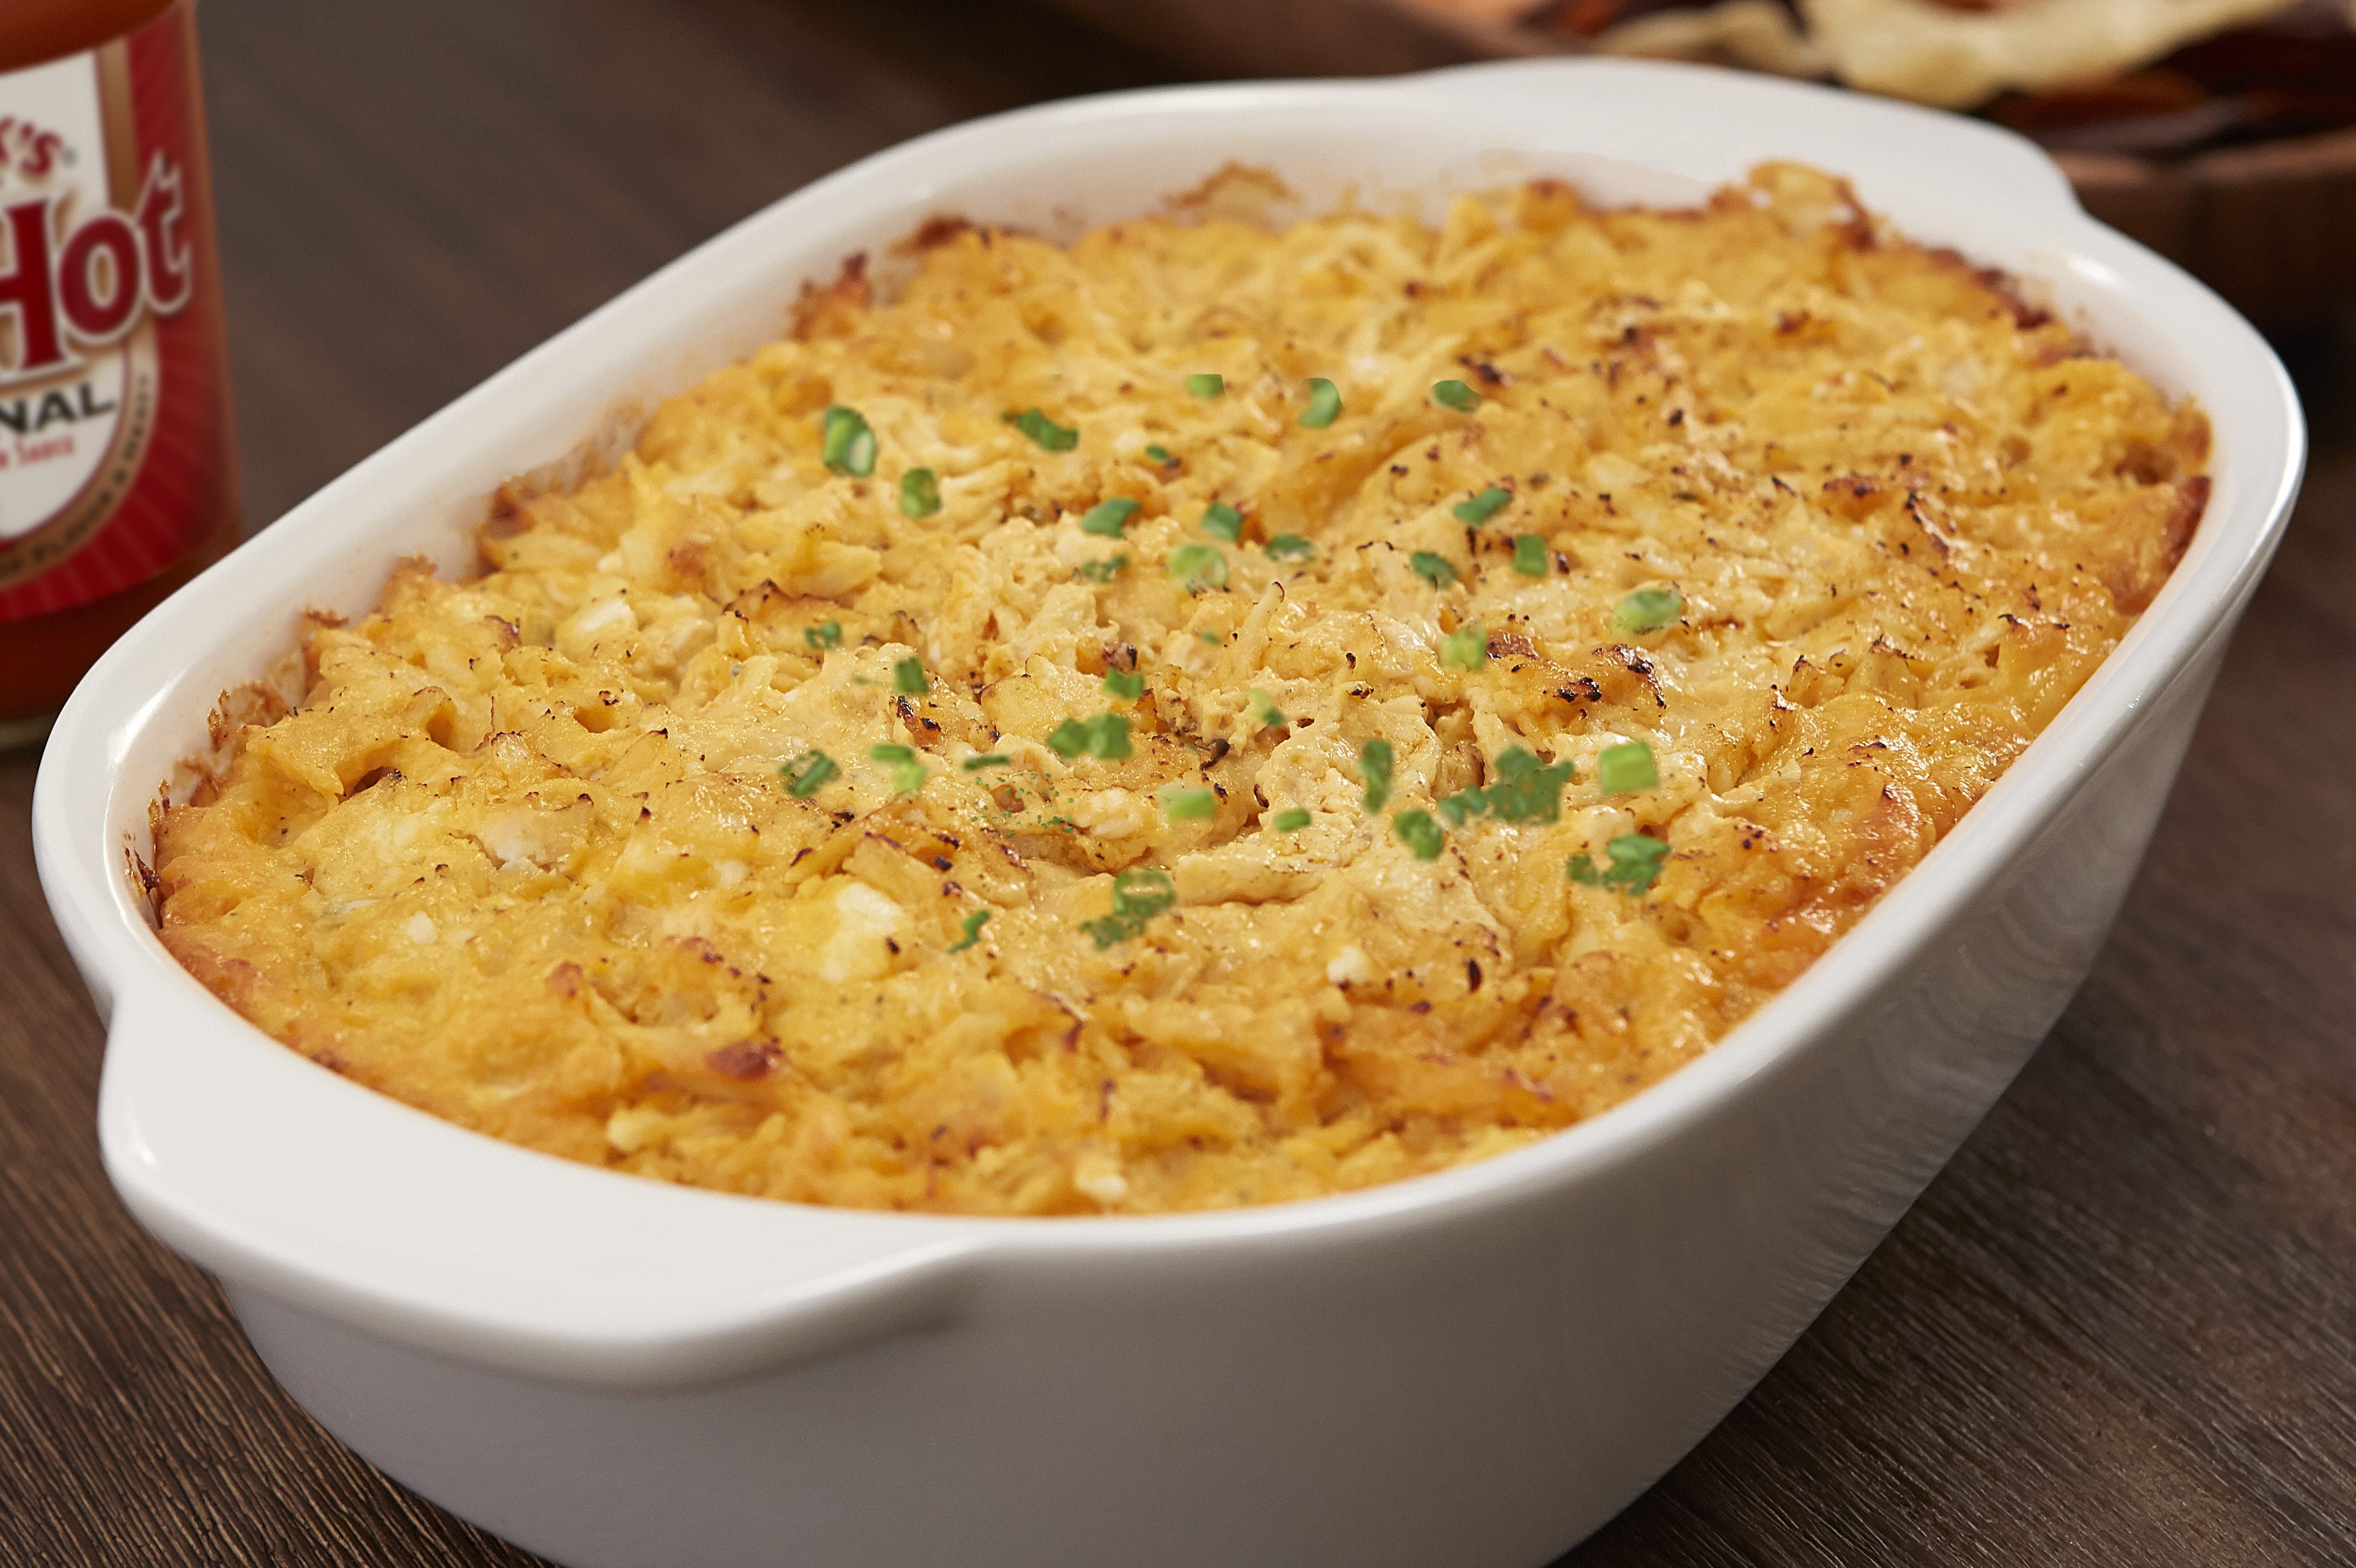 Here's a Super Bowl Recipe for Buffalo Chicken Dip With Frank’s RedHot ...